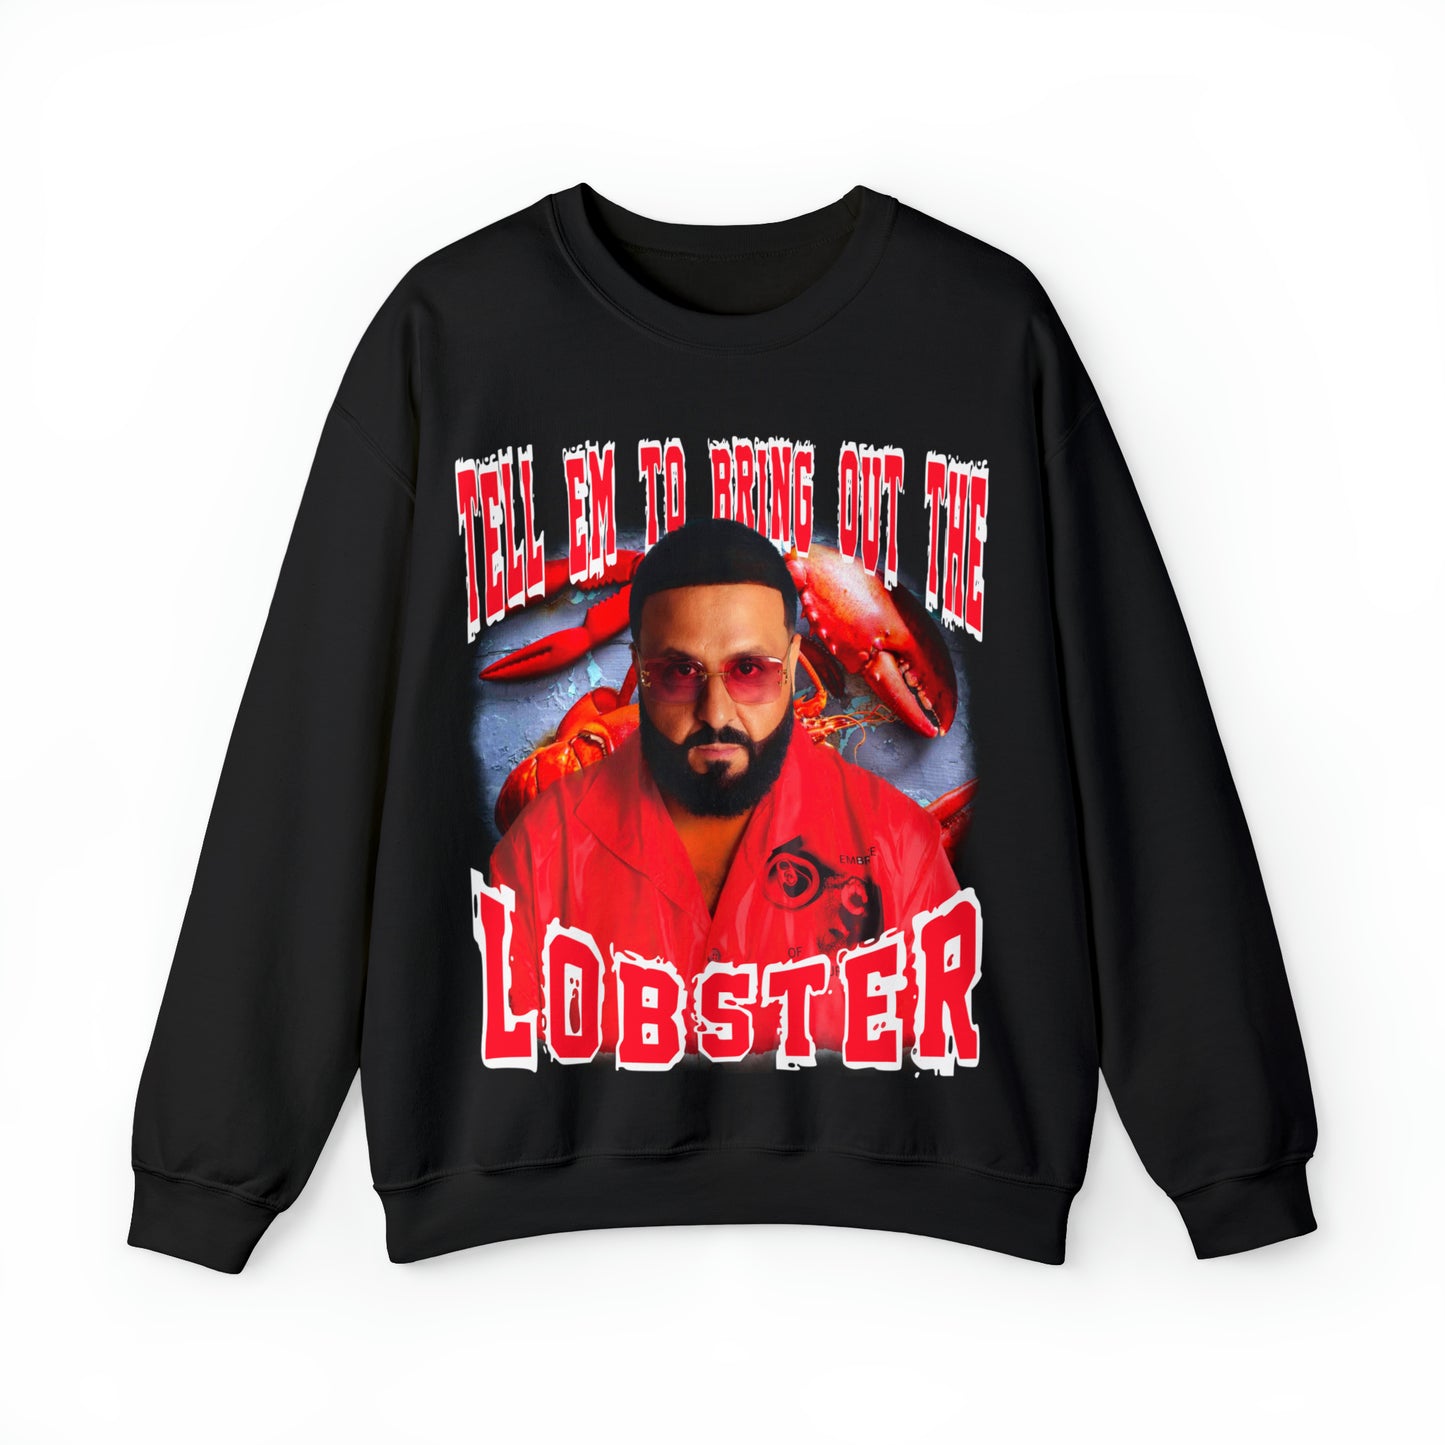 TELL EM TO BRING OUT THE LOBSTER